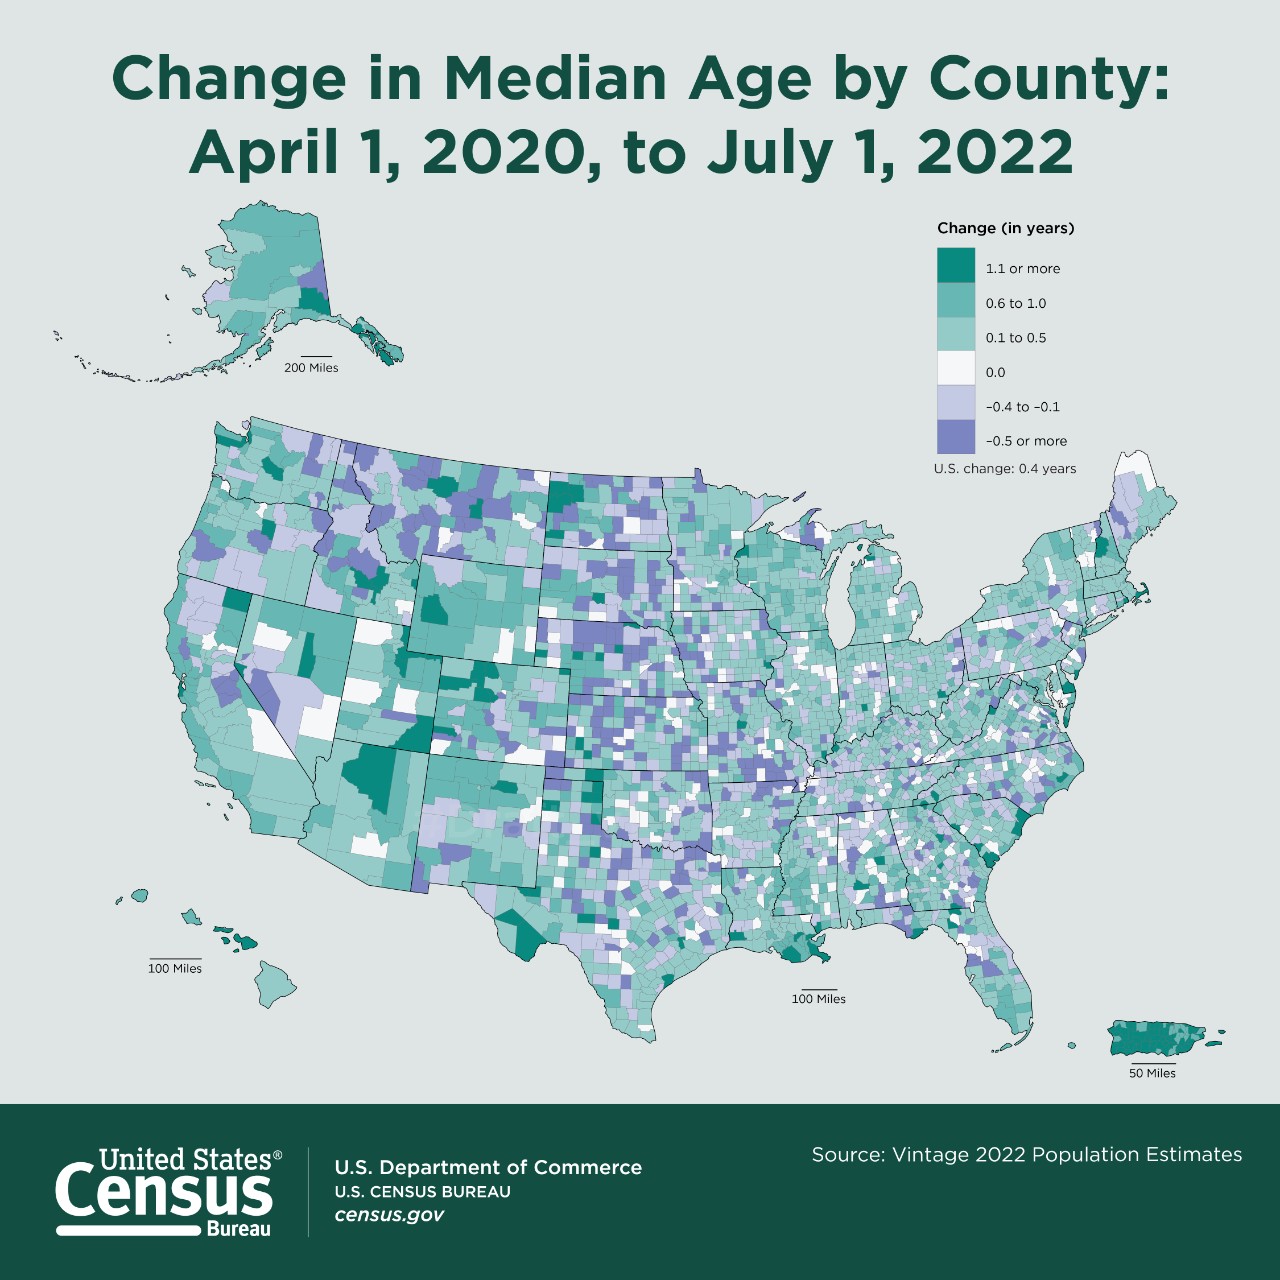 Change in Median Age by County: April 1, 2020, to July 1, 2022